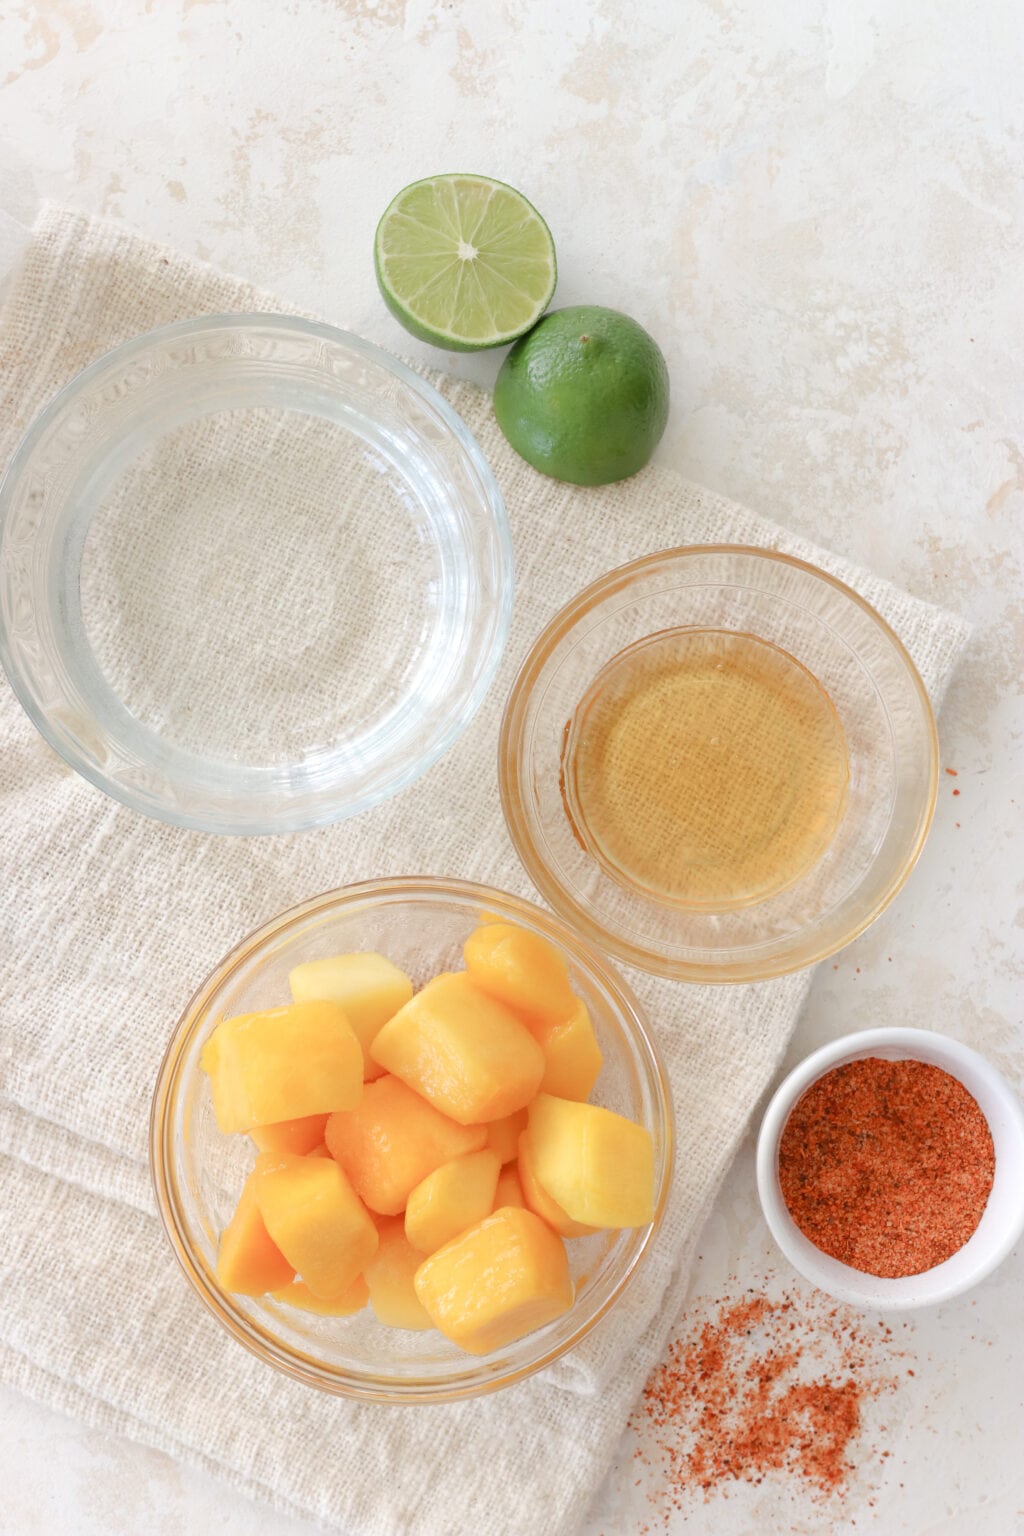 The ingredients to make mango tajin popsicles are on a white counter. There are limes cut in half, a bowl of water, a bowl of honey, a bowl of frozen mango and a small bowl of tajin